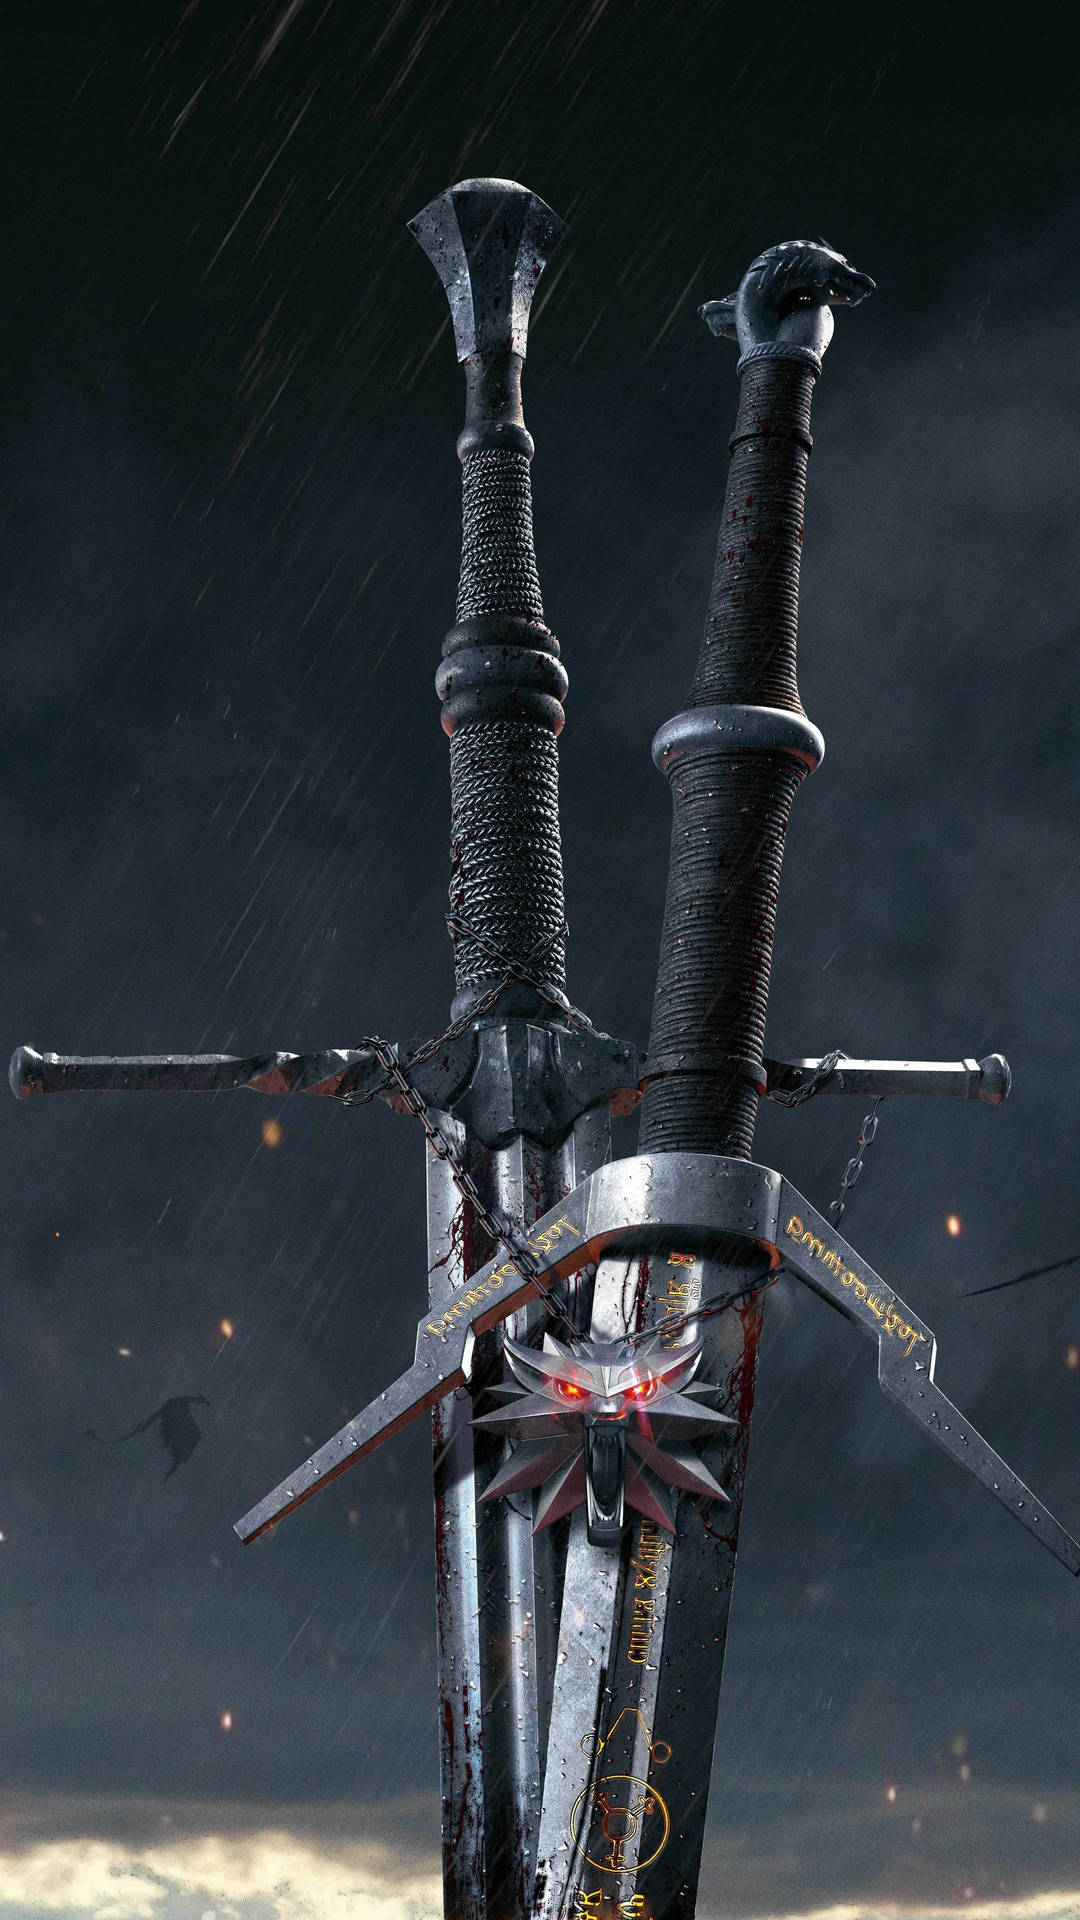 Gear Up For The Hunt - The Witcher 3: Wild Hunt Swords Wallpaper